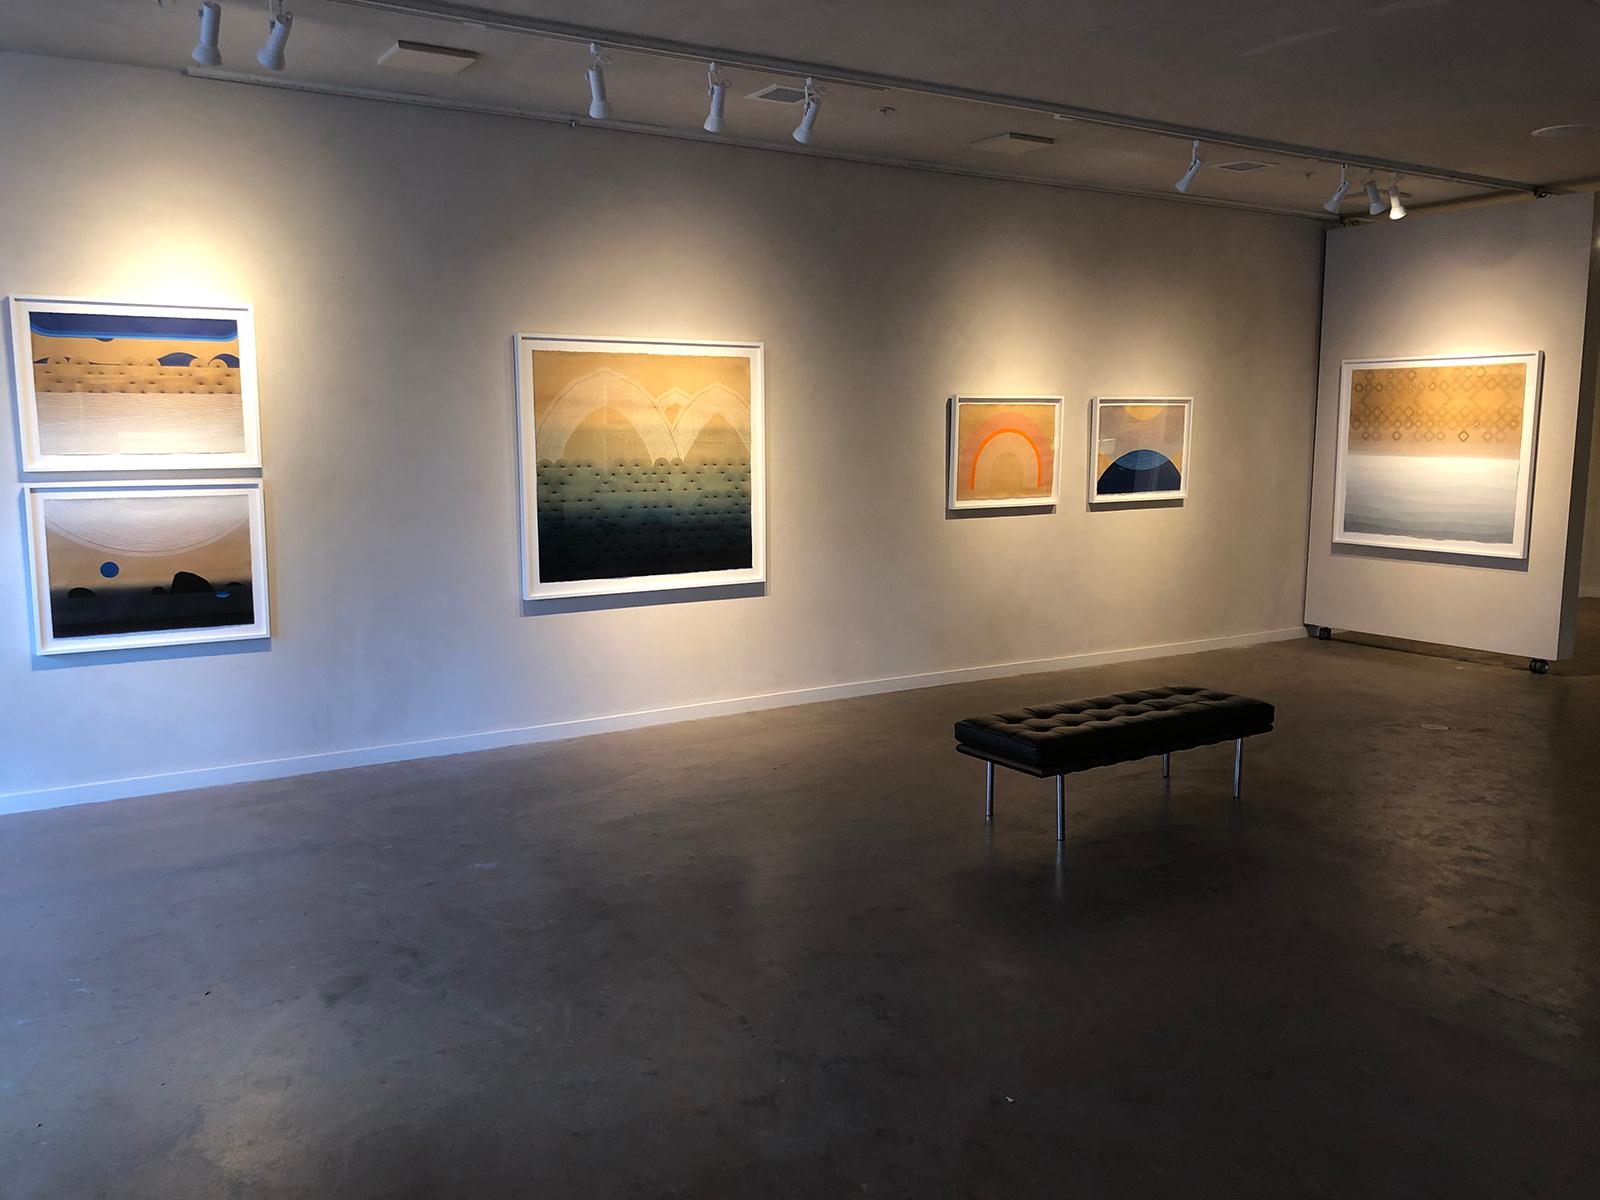 Precise, abstract landscape, painting on dyed paper with geometric suggestions of a seascape. Kelly Ording's internalized landscapes and geometric abstractions are filled with subtle colors. Framed in white. 
Kelly Ording is an Oakland California